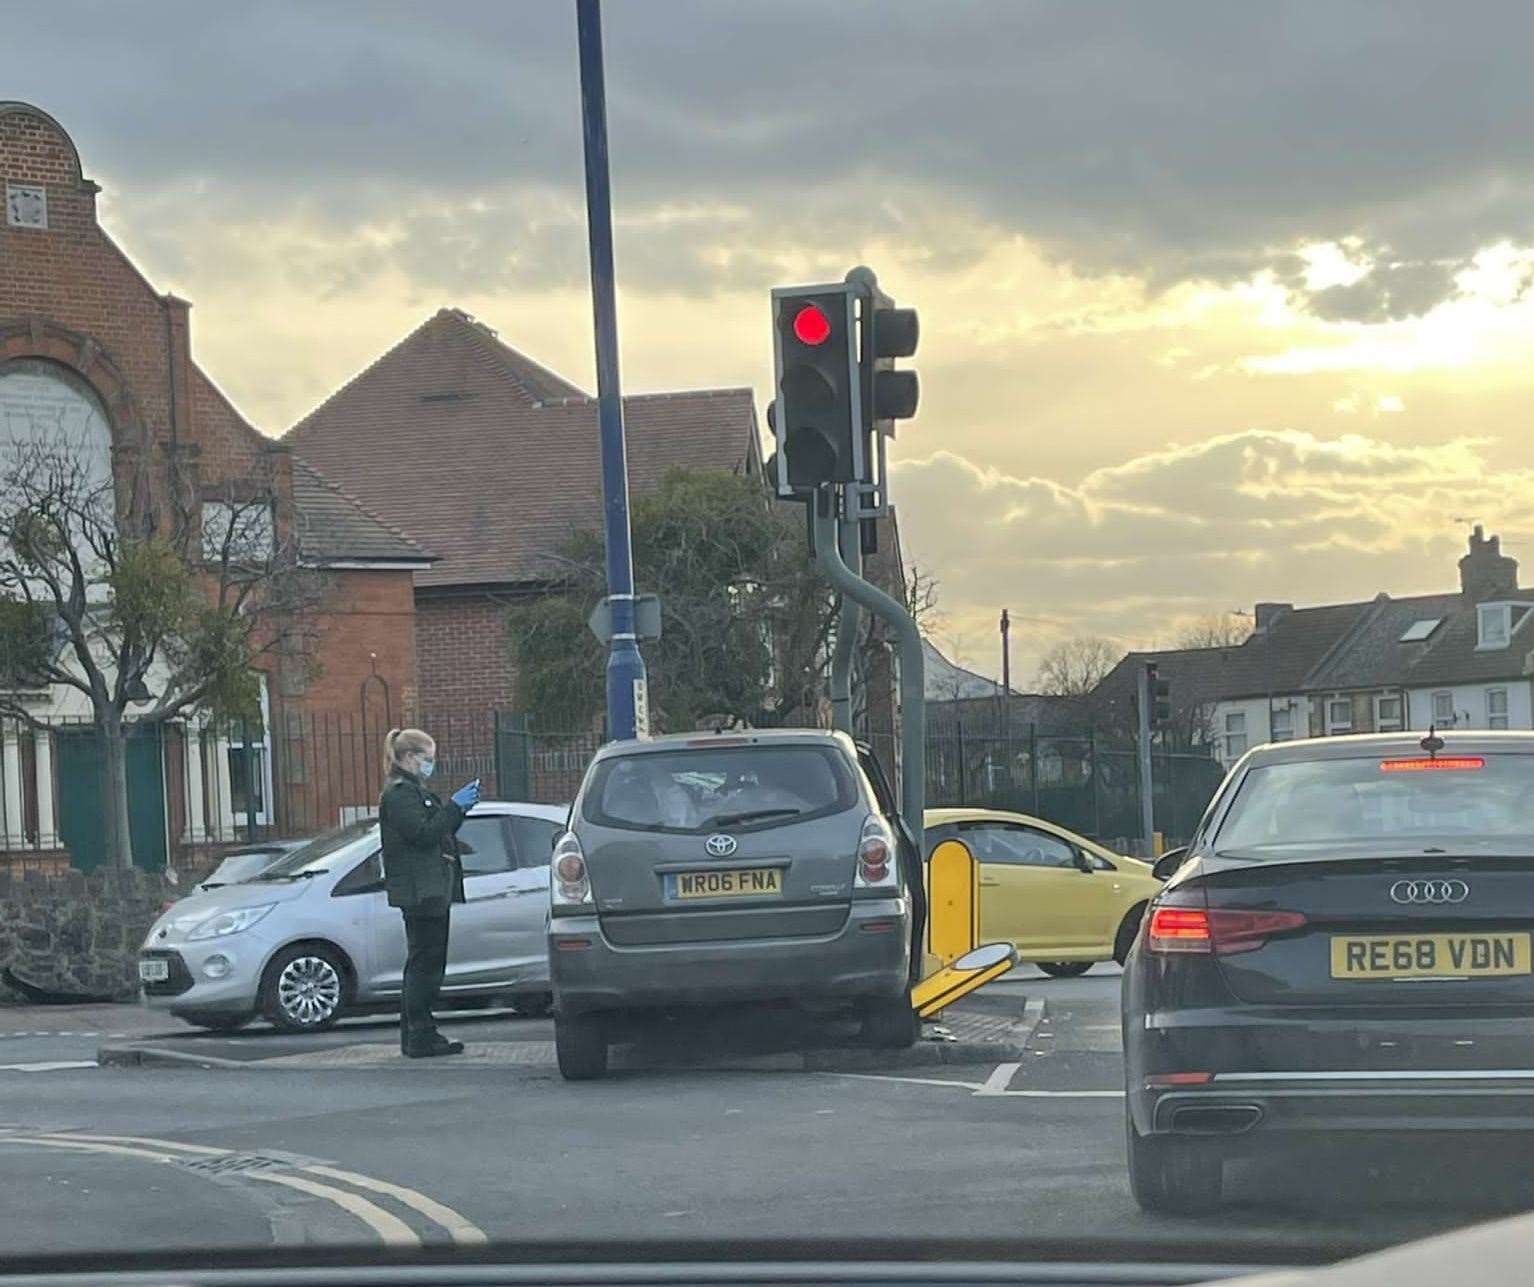 Paramedics were called to the scene of a crash on Wrotham Road, Gravesend